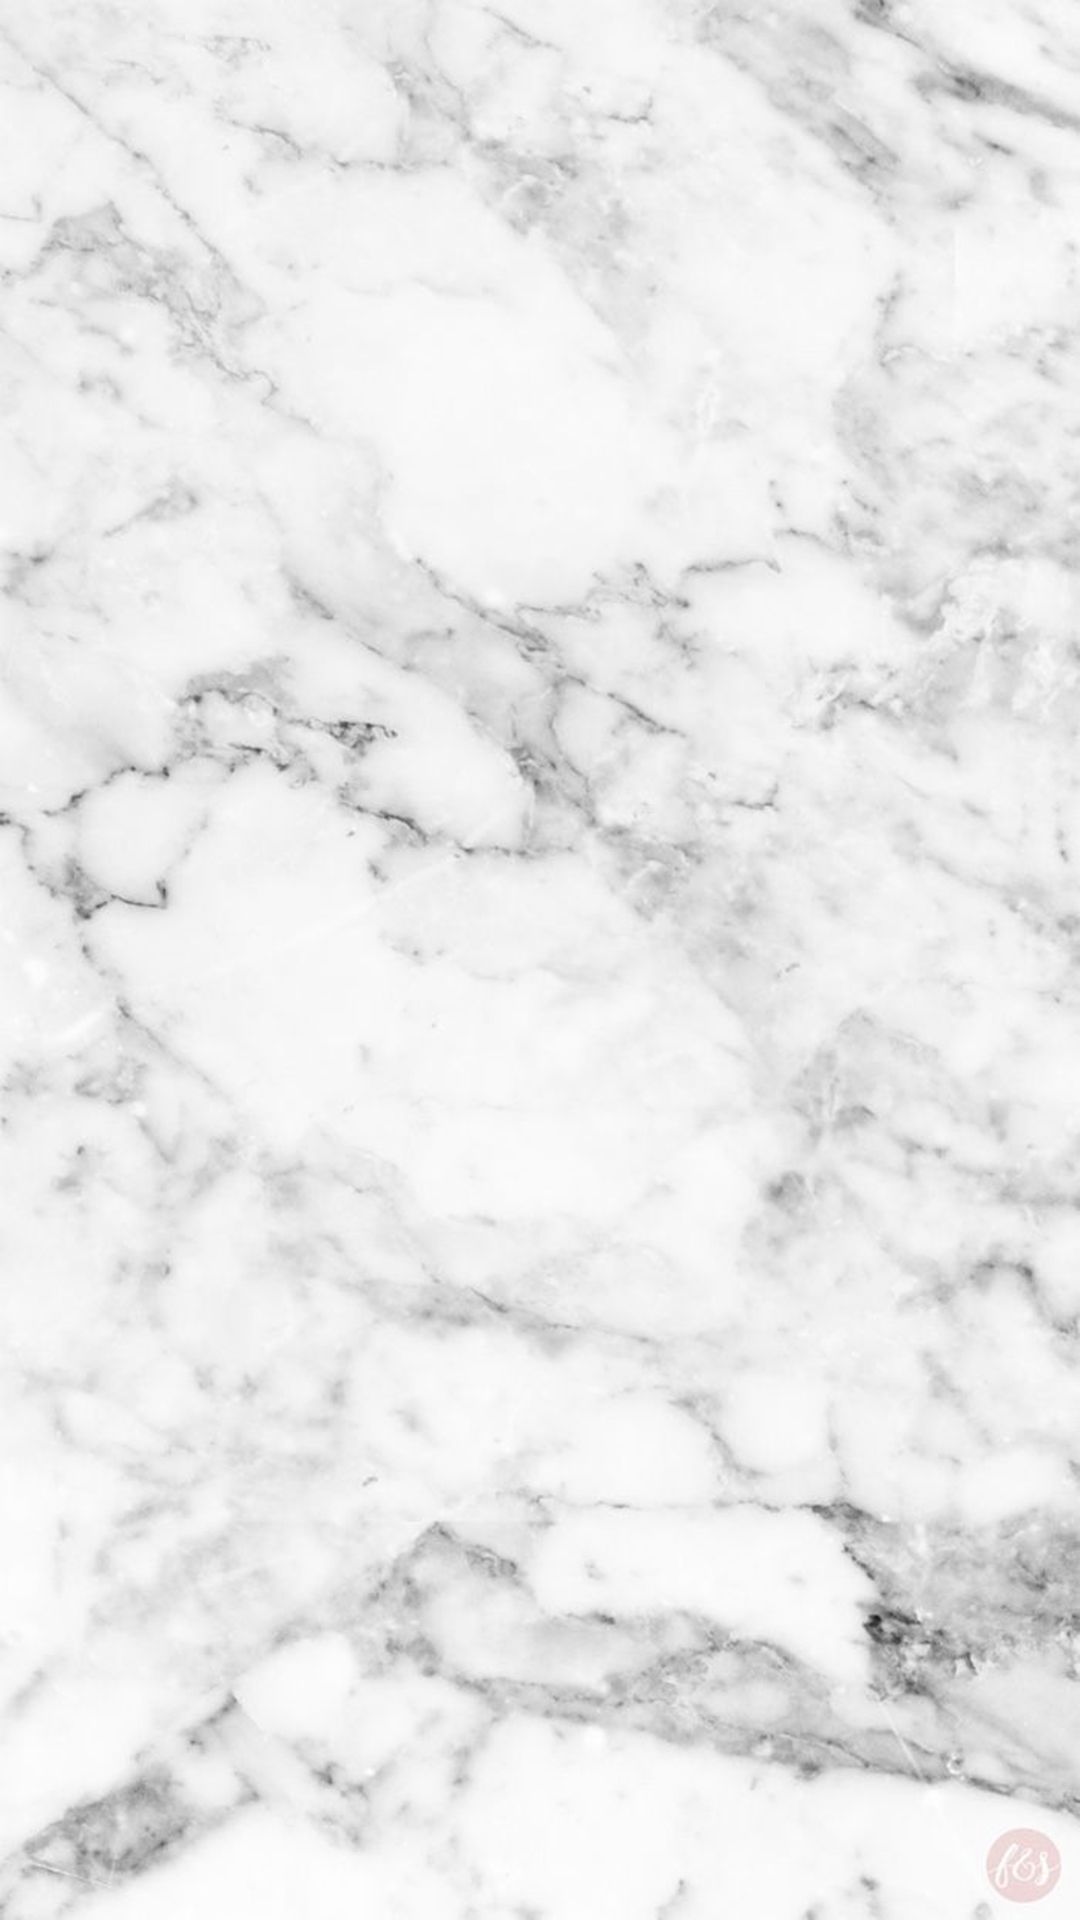 A white marble background with black and gray accents - Marble